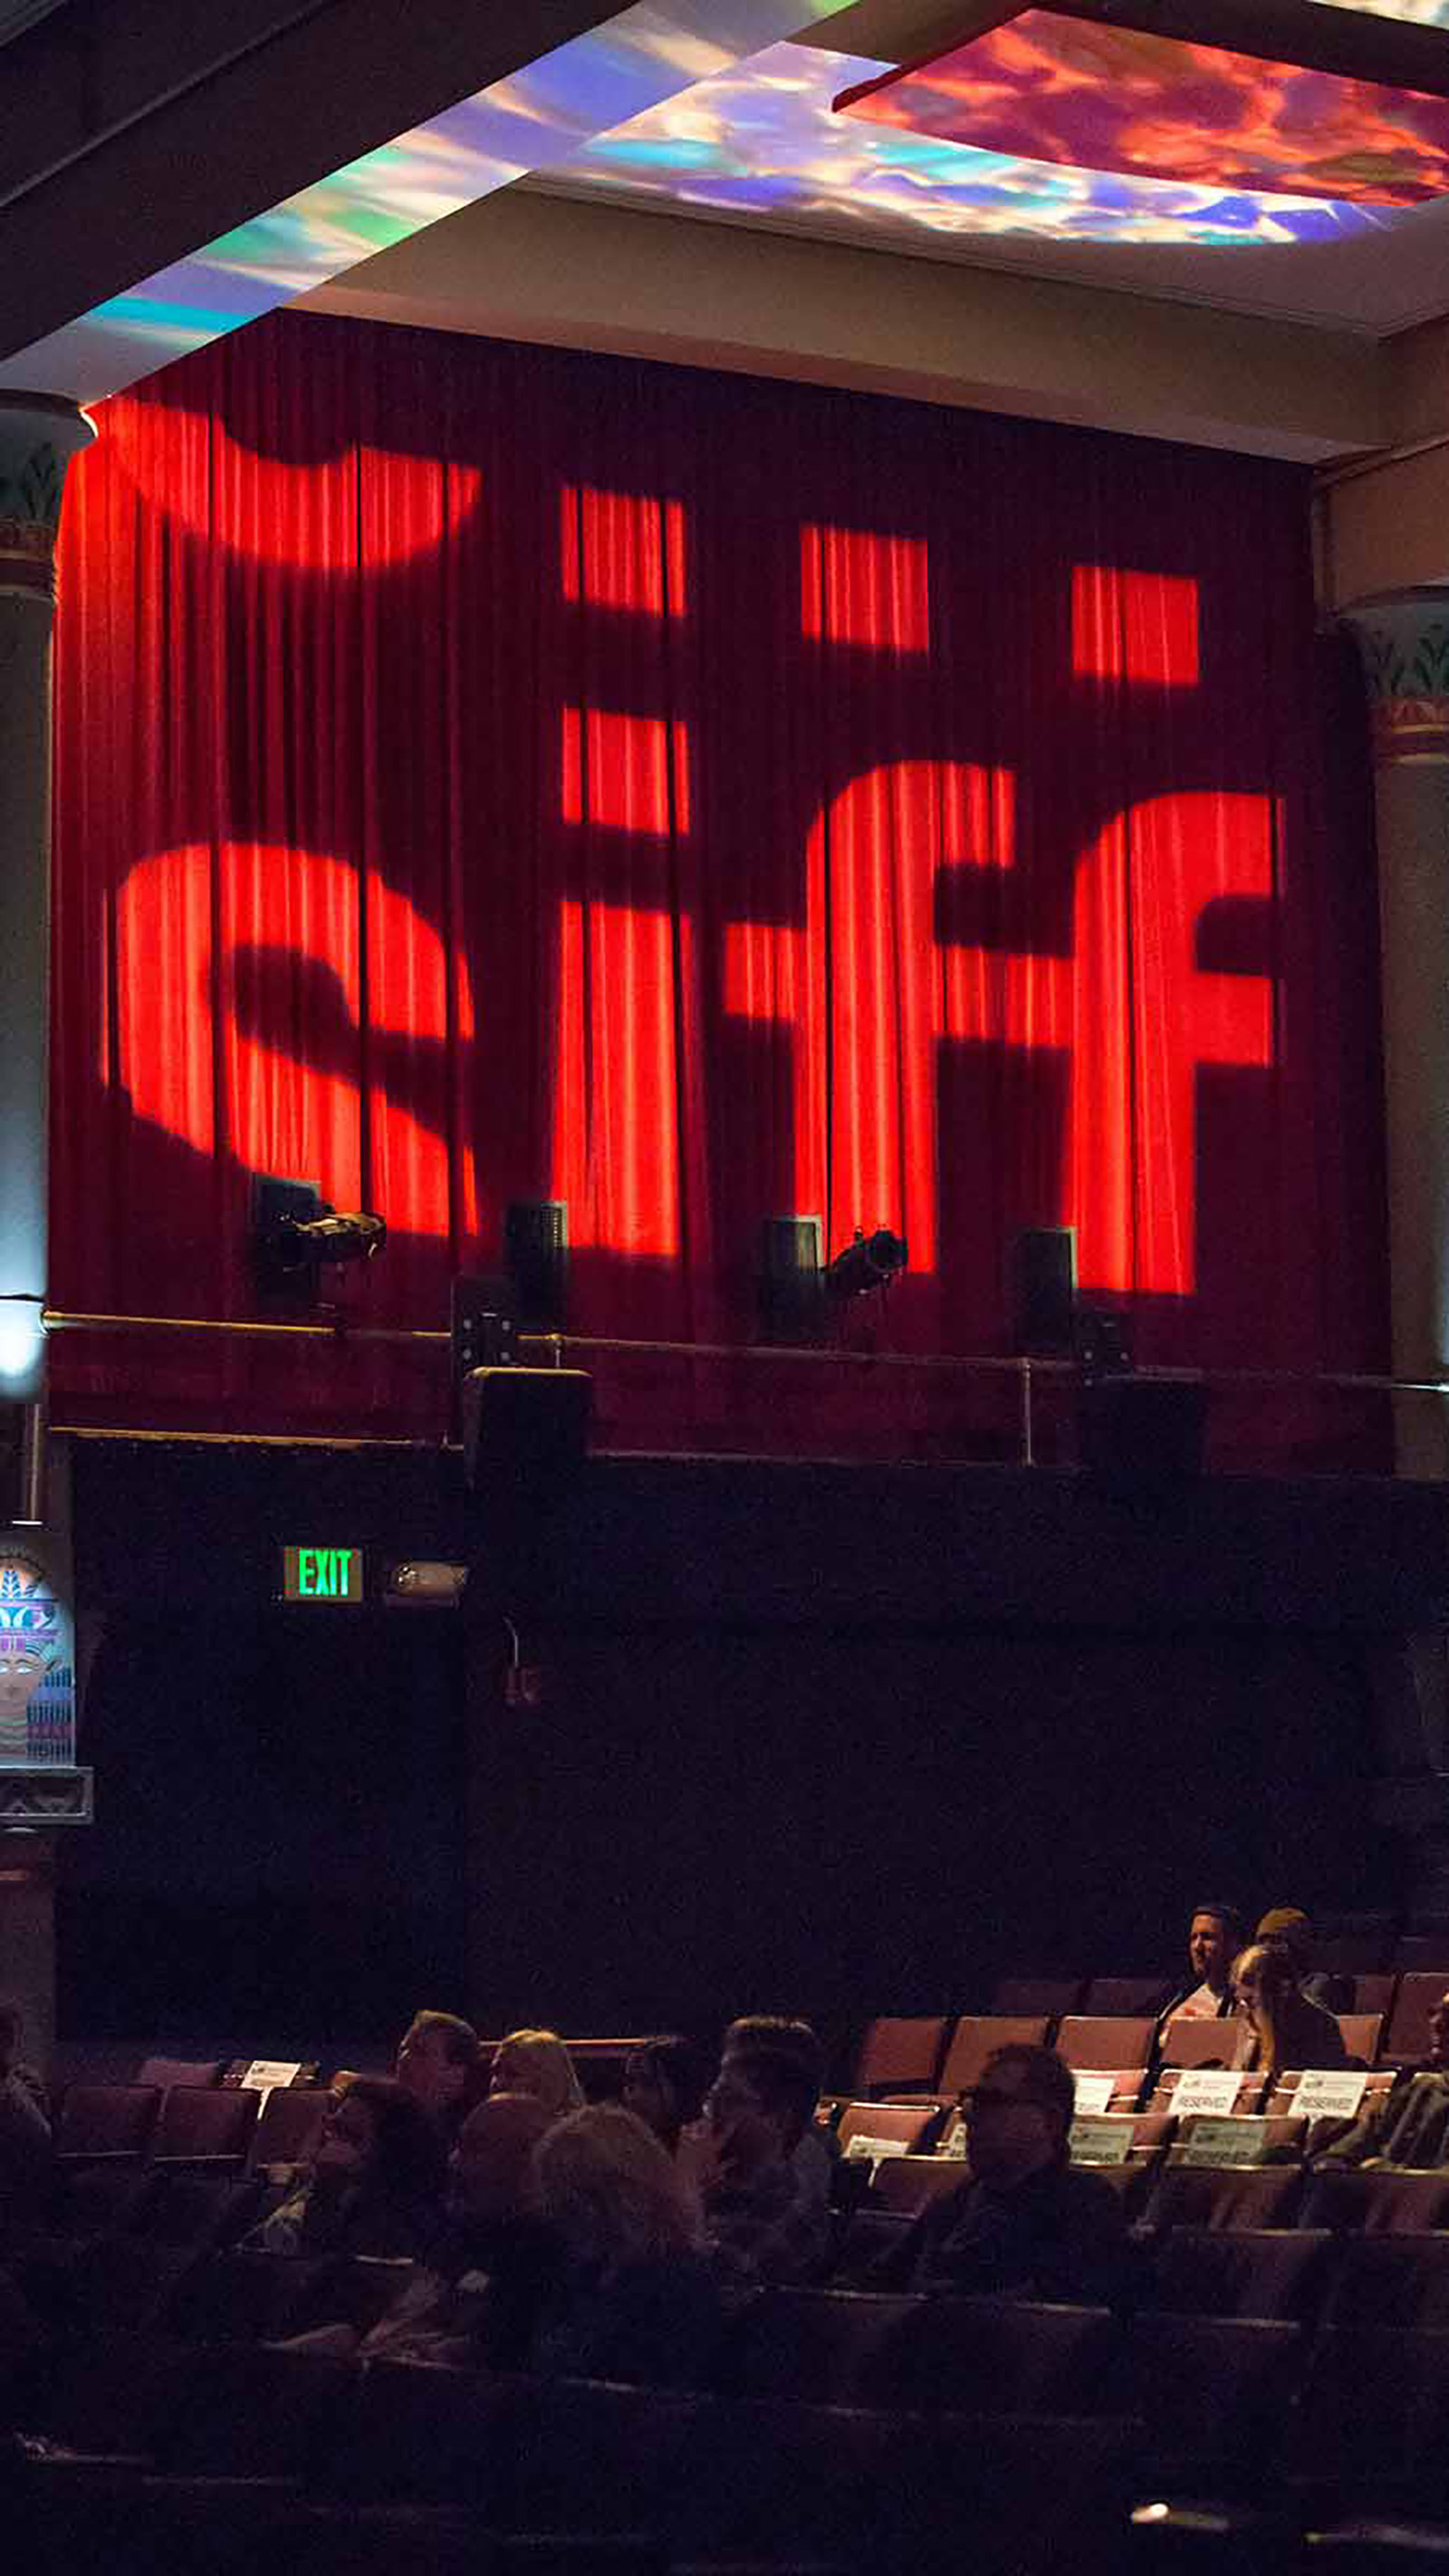 Those classic SIFF letters light up the curtain at SIFF Cinema Egyptian